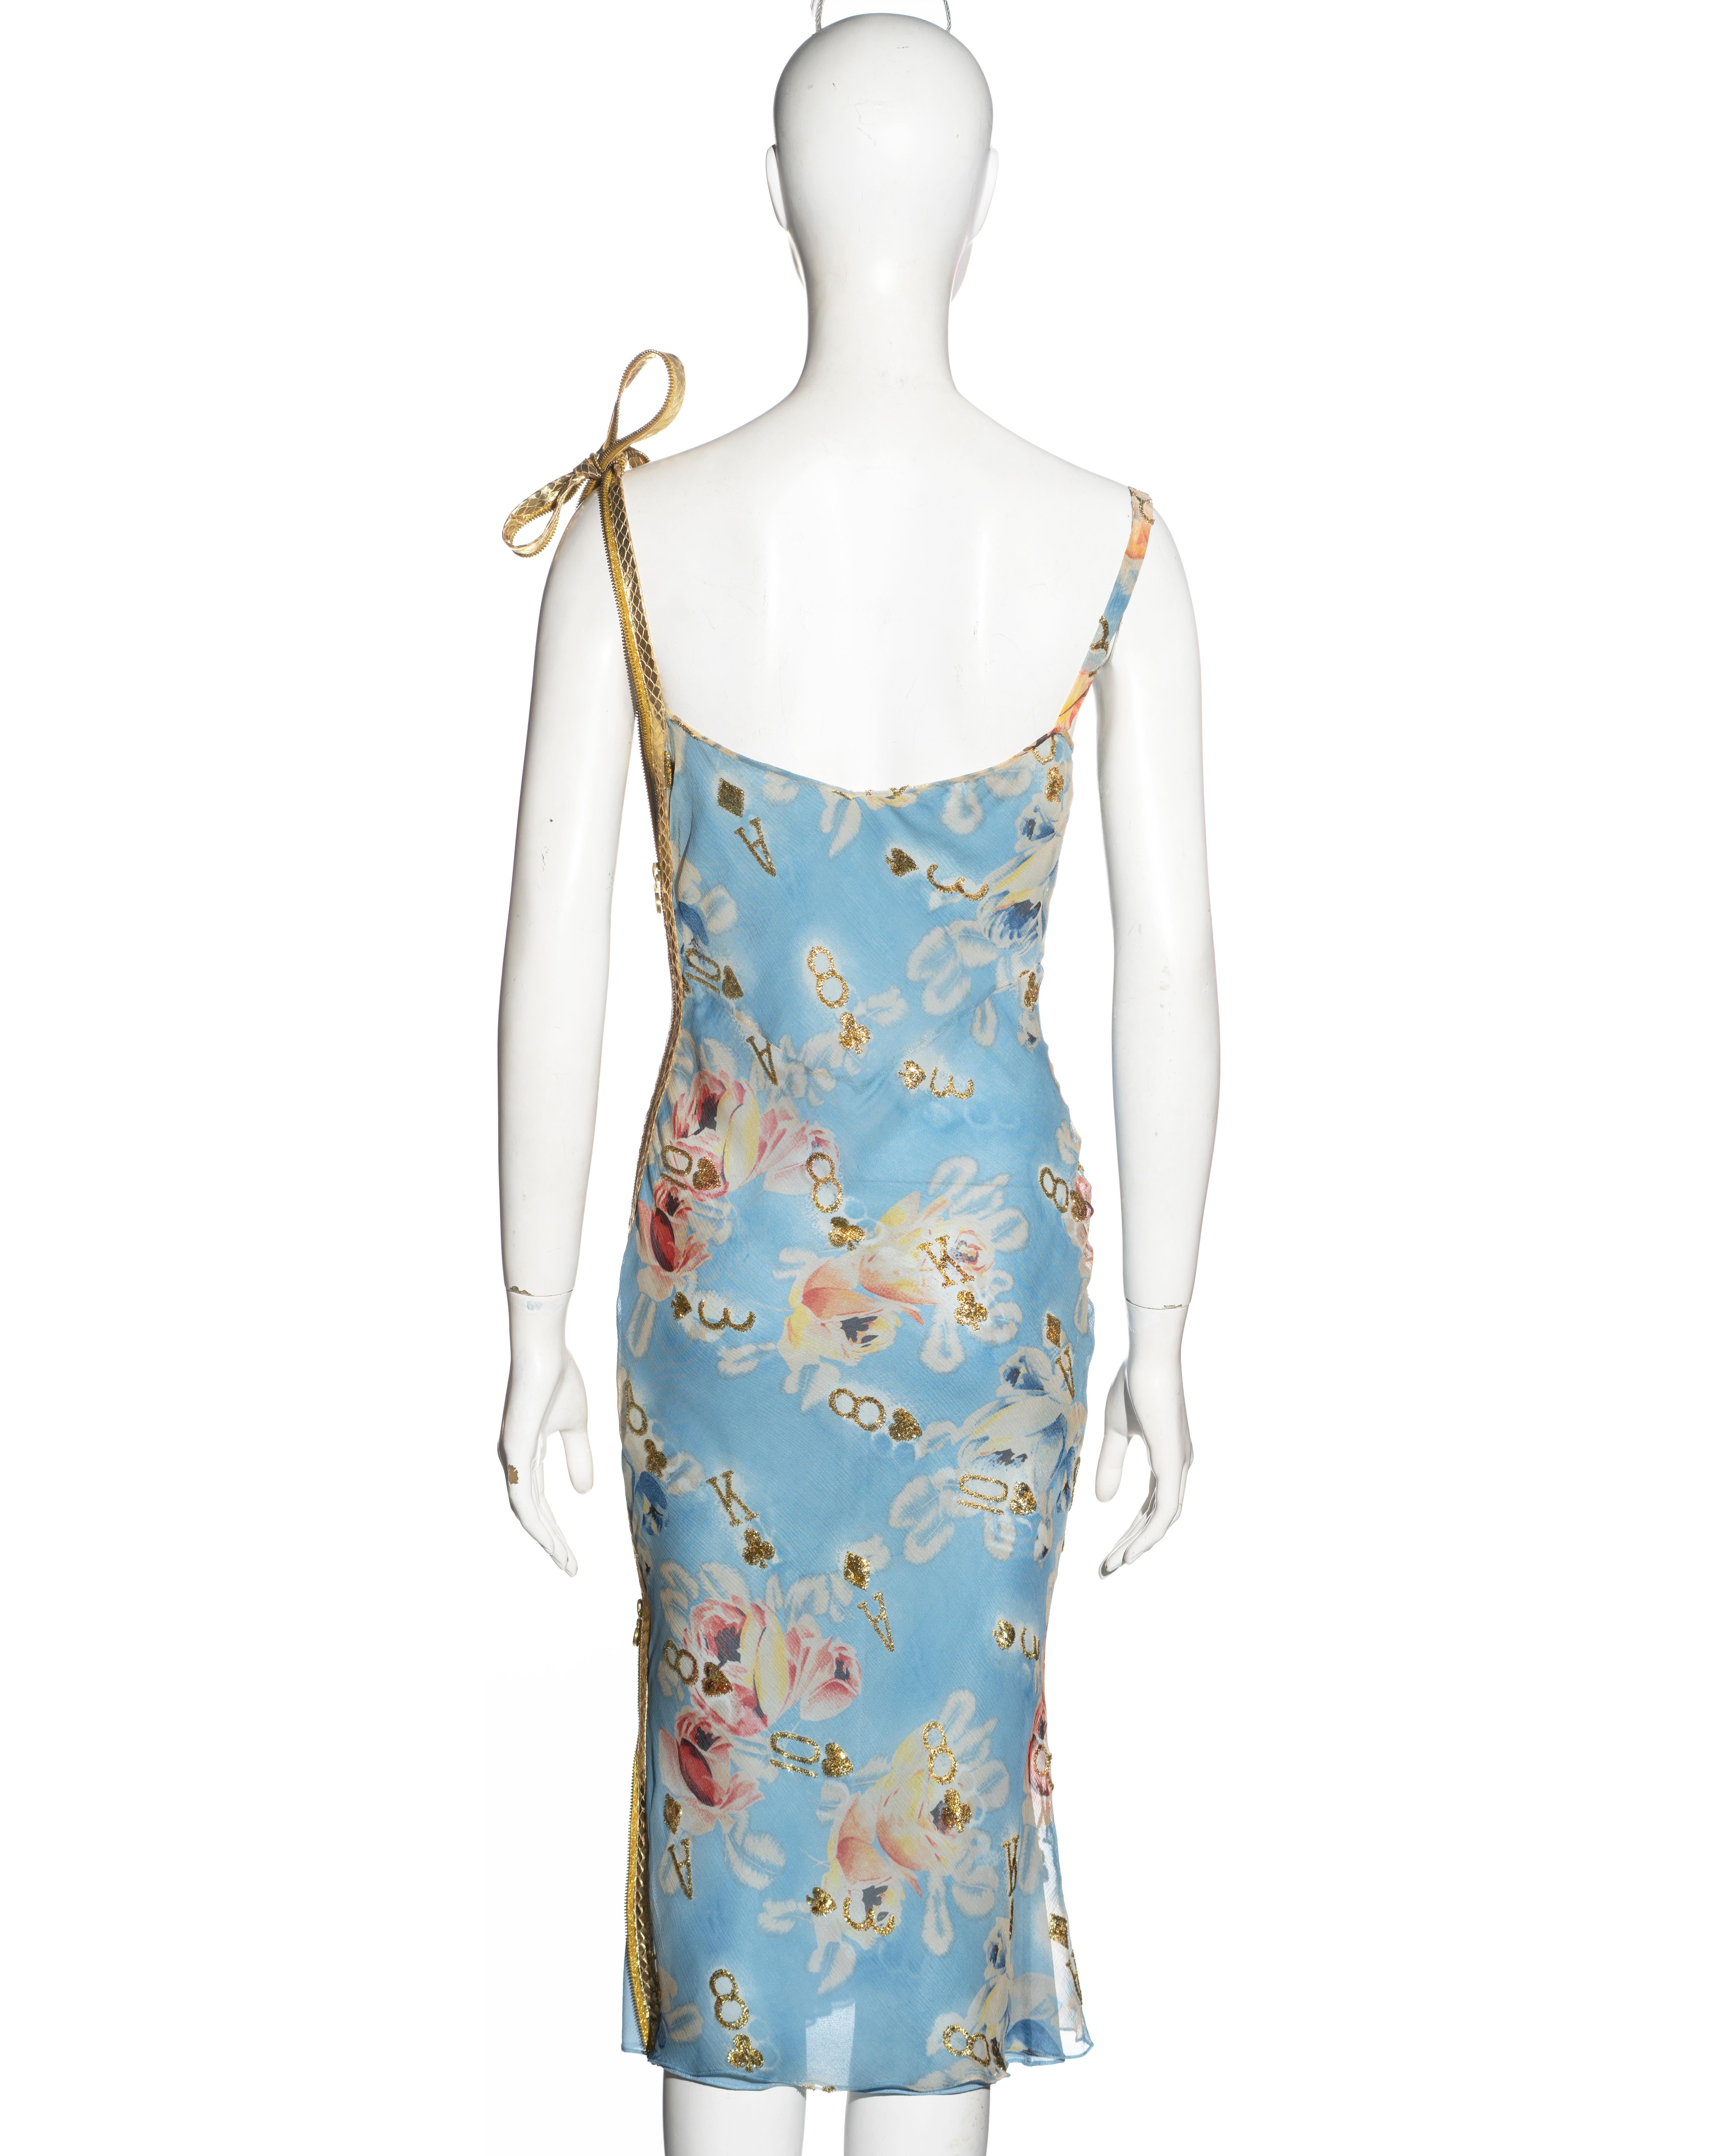 Christian Dior by John Galliano pale blue floral silk and leather dress, ss 2001 6